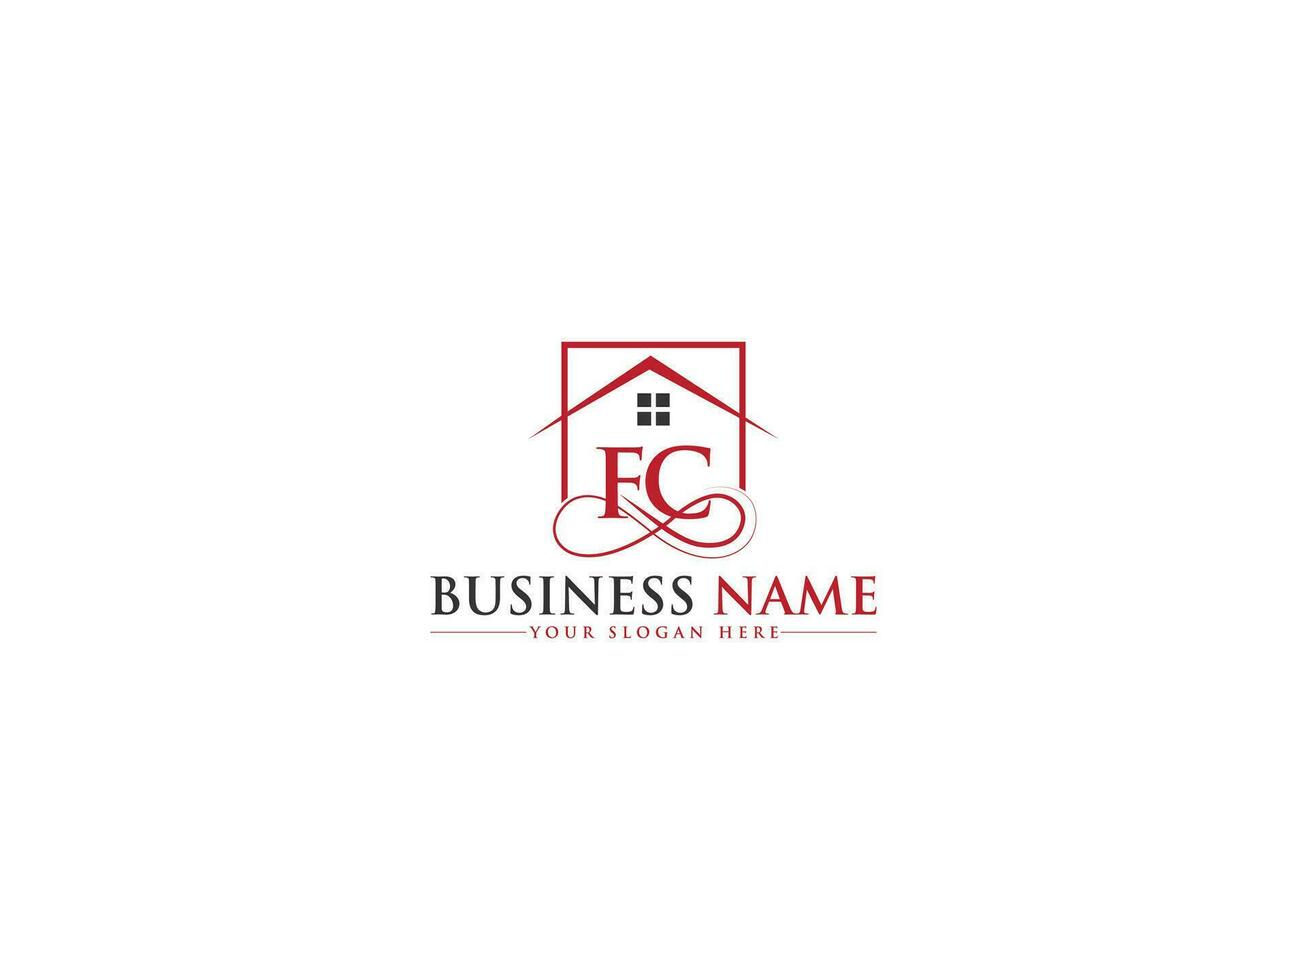 Monogram Building Fc Logo Icon, Initial Letters fc Real Estate Logo Vector